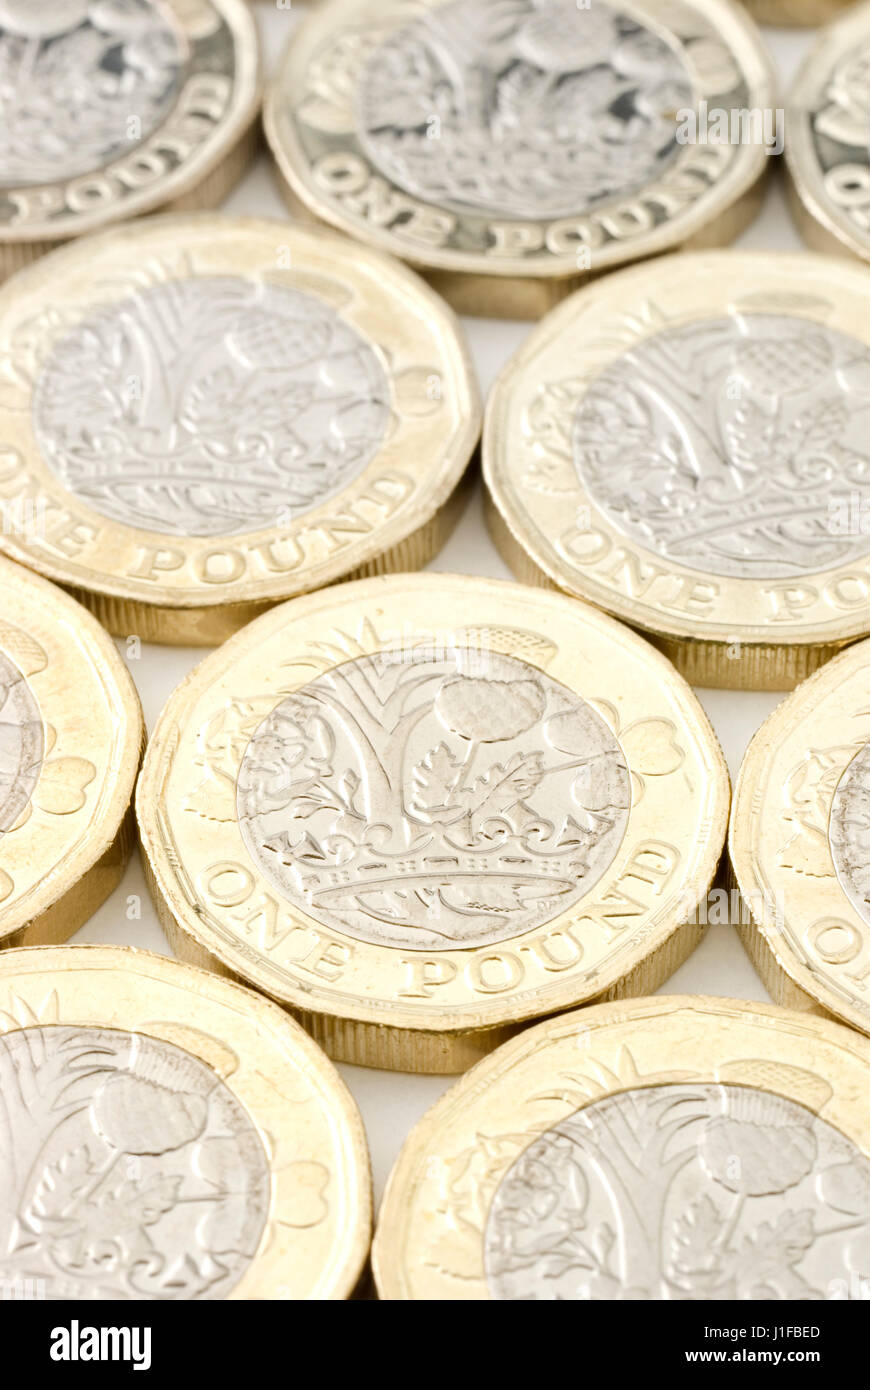 Group of Pound Coins Stock Photo